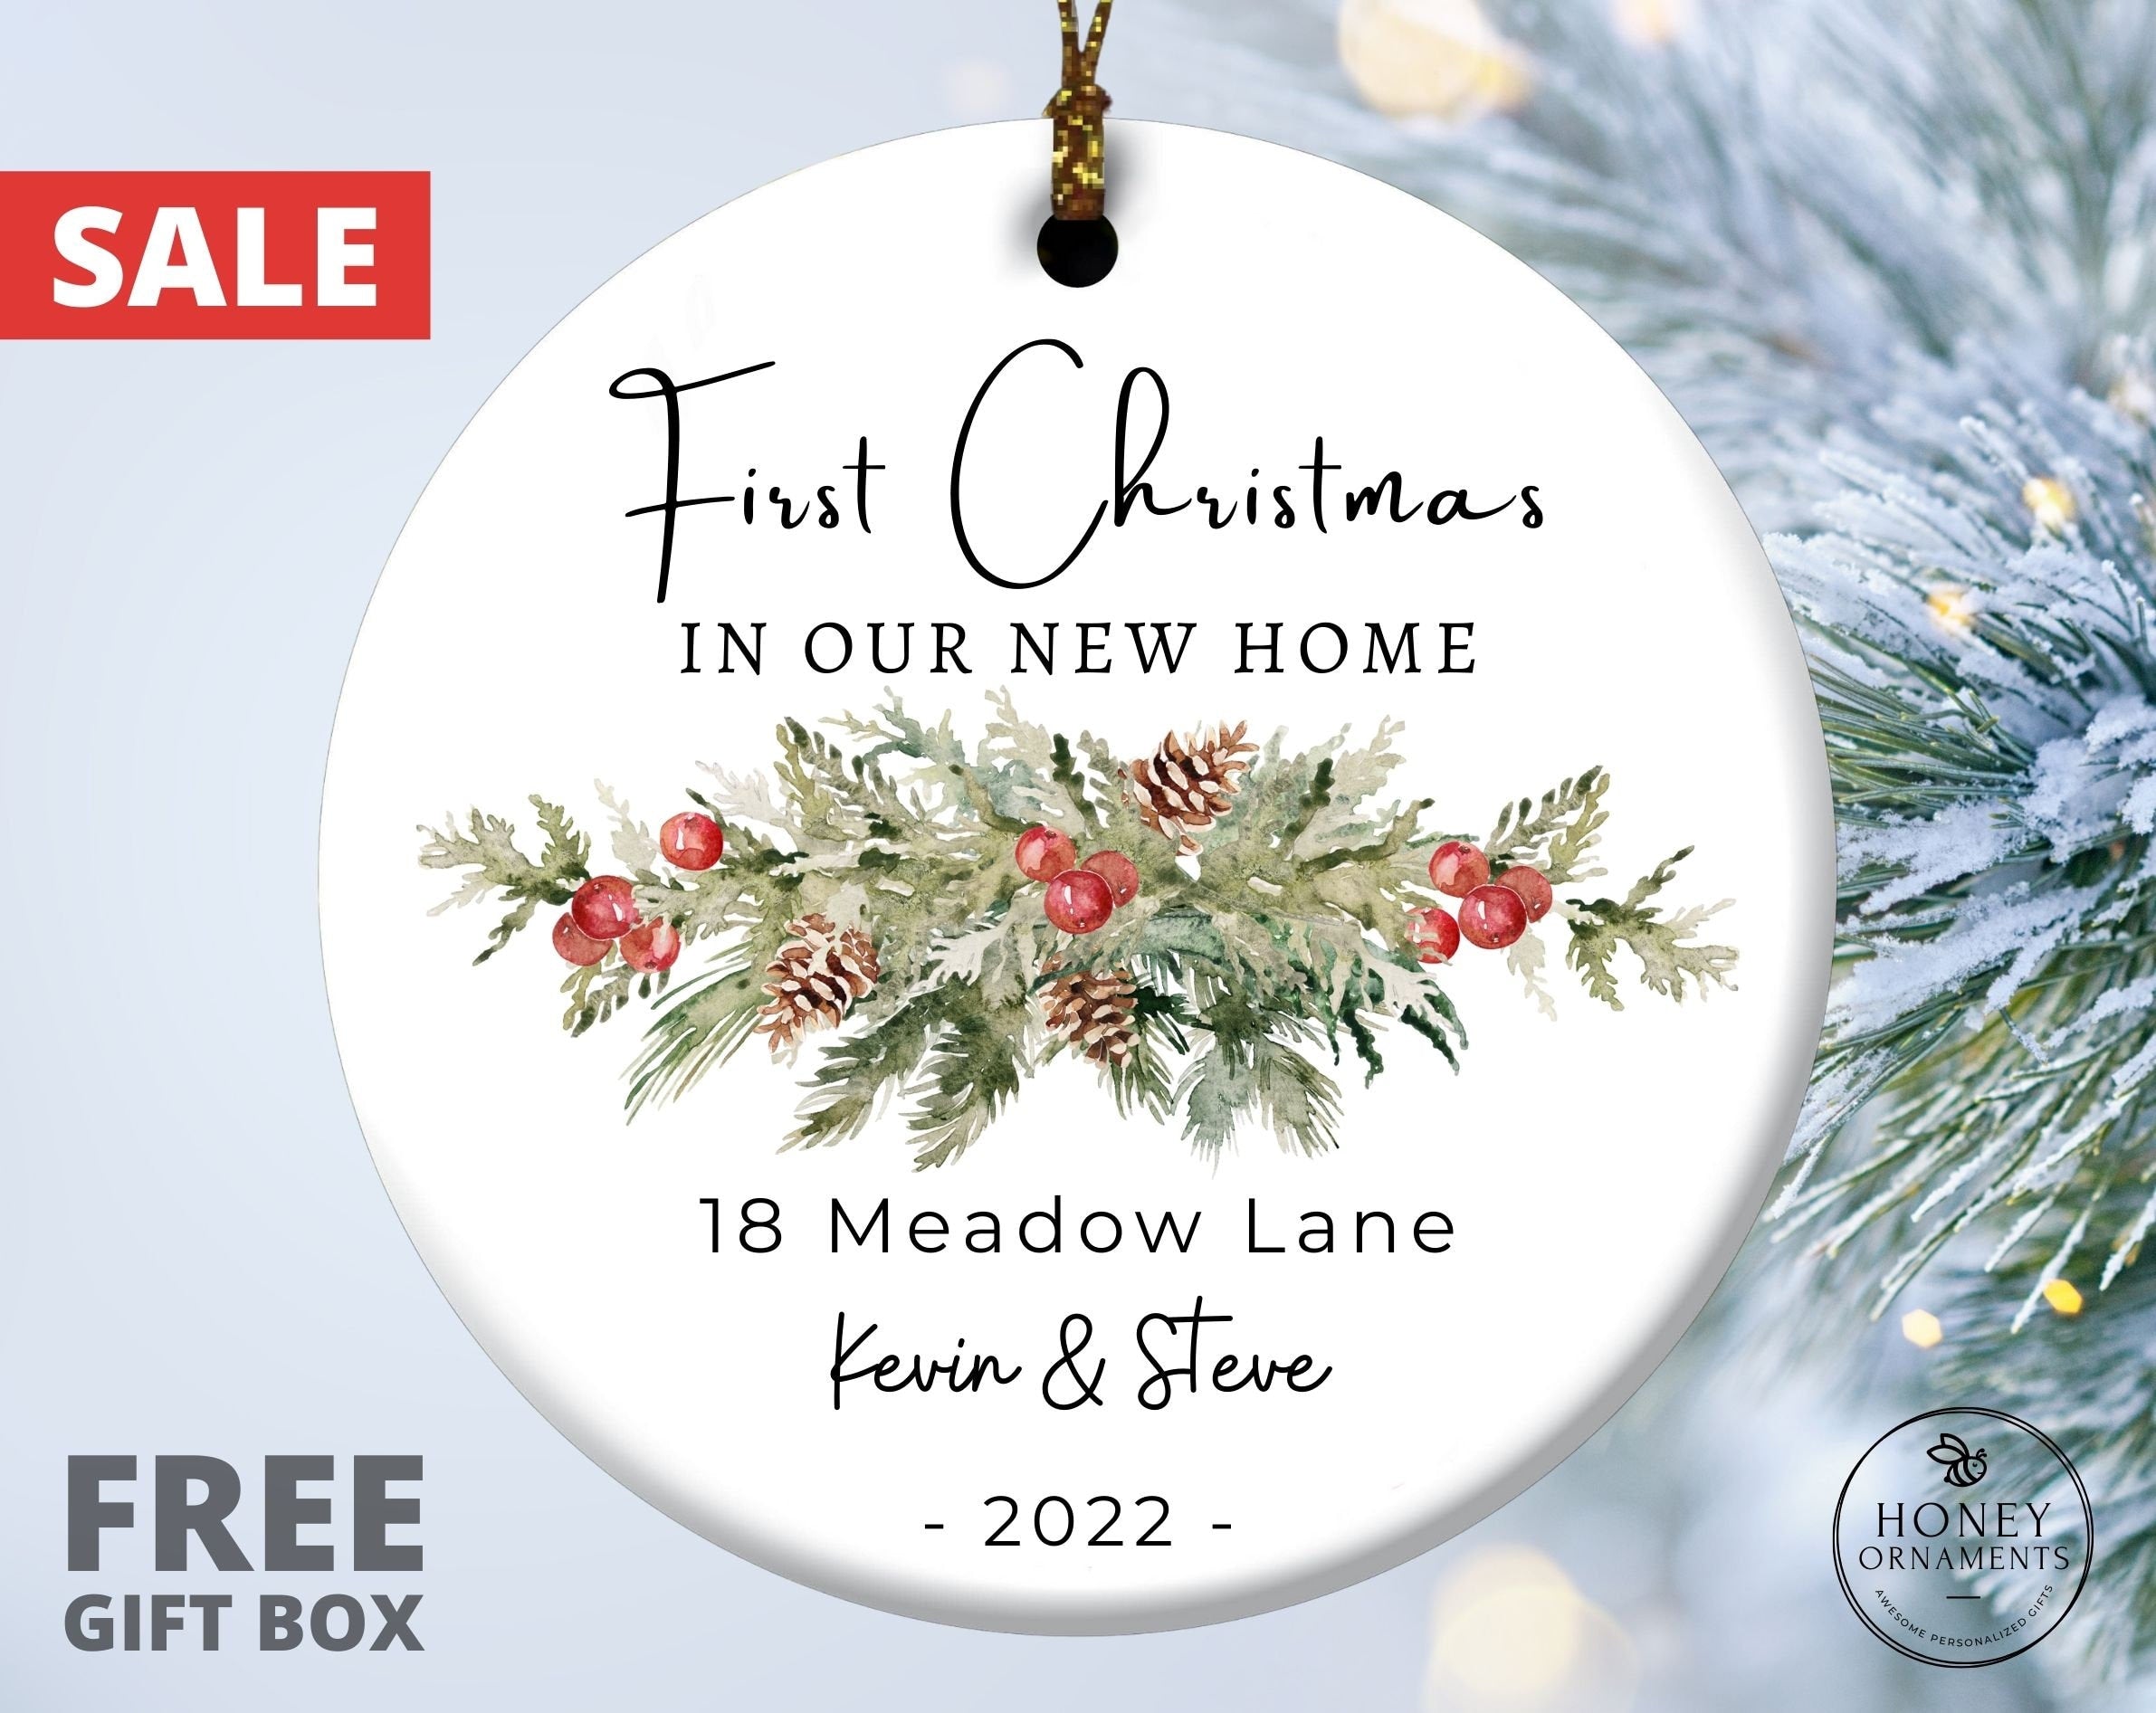 OUR NEW HOME HOUSE FIRST CHRISTMAS FRAME PERSONALIZED CHRISTMAS TREE ORNAMENT 